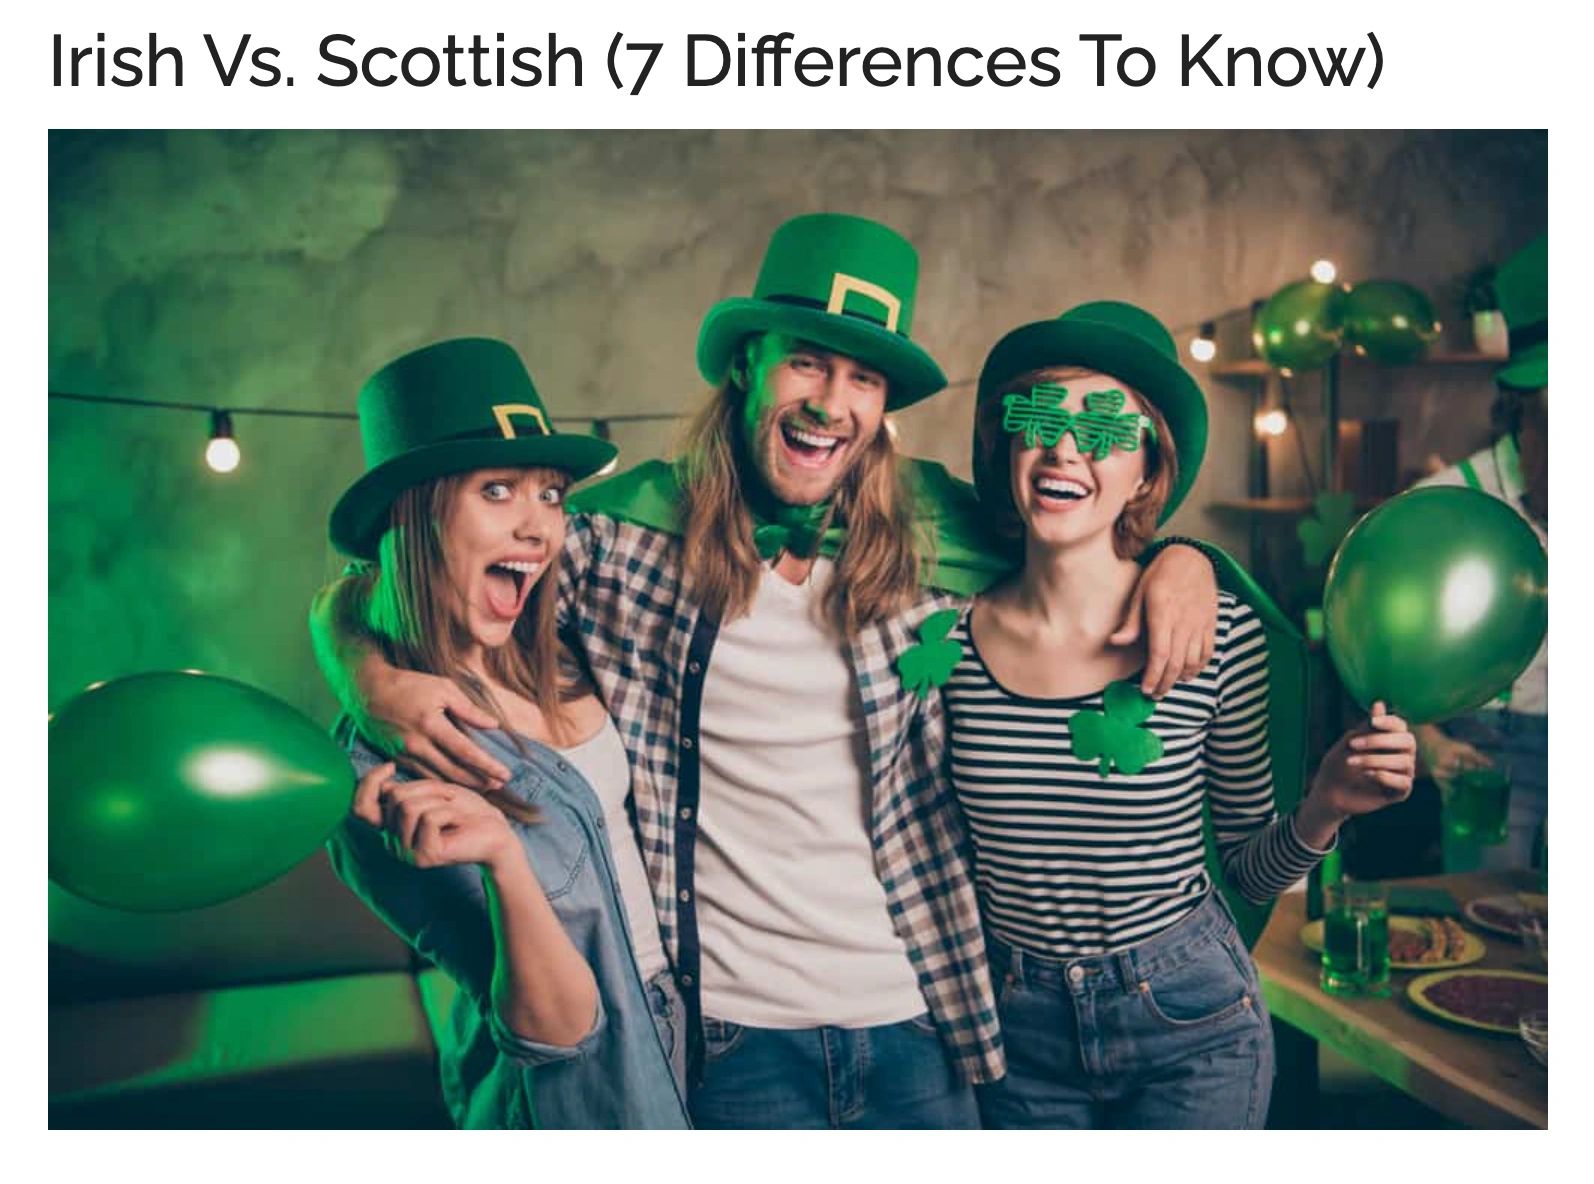 people dressed in Irish hats and shamrocks with balloons